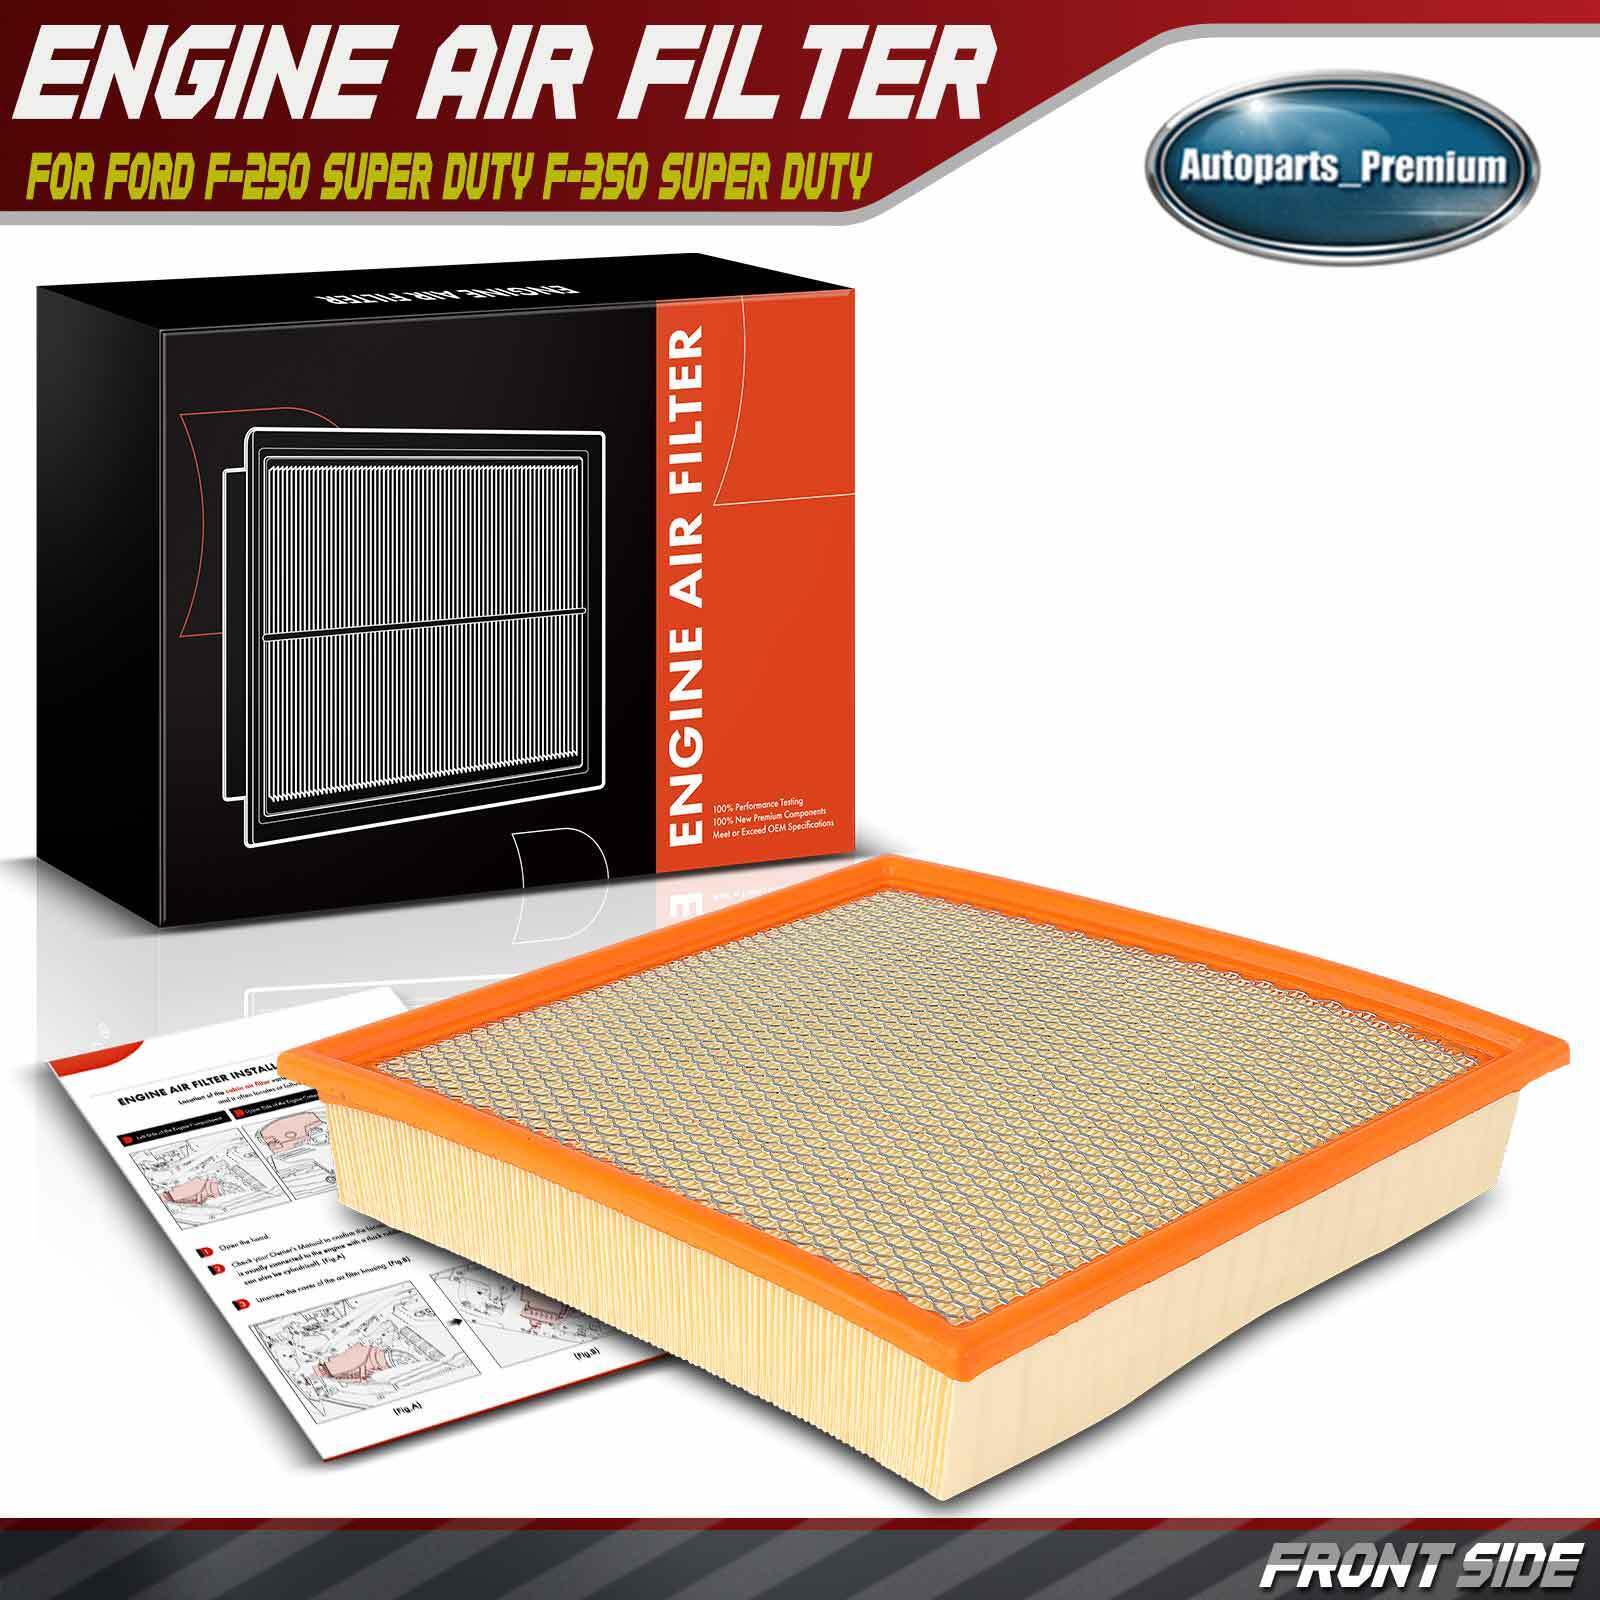 Engine Air Filter for Ford F-250 Super Duty F-350 Super Duty F-450 Super Duty